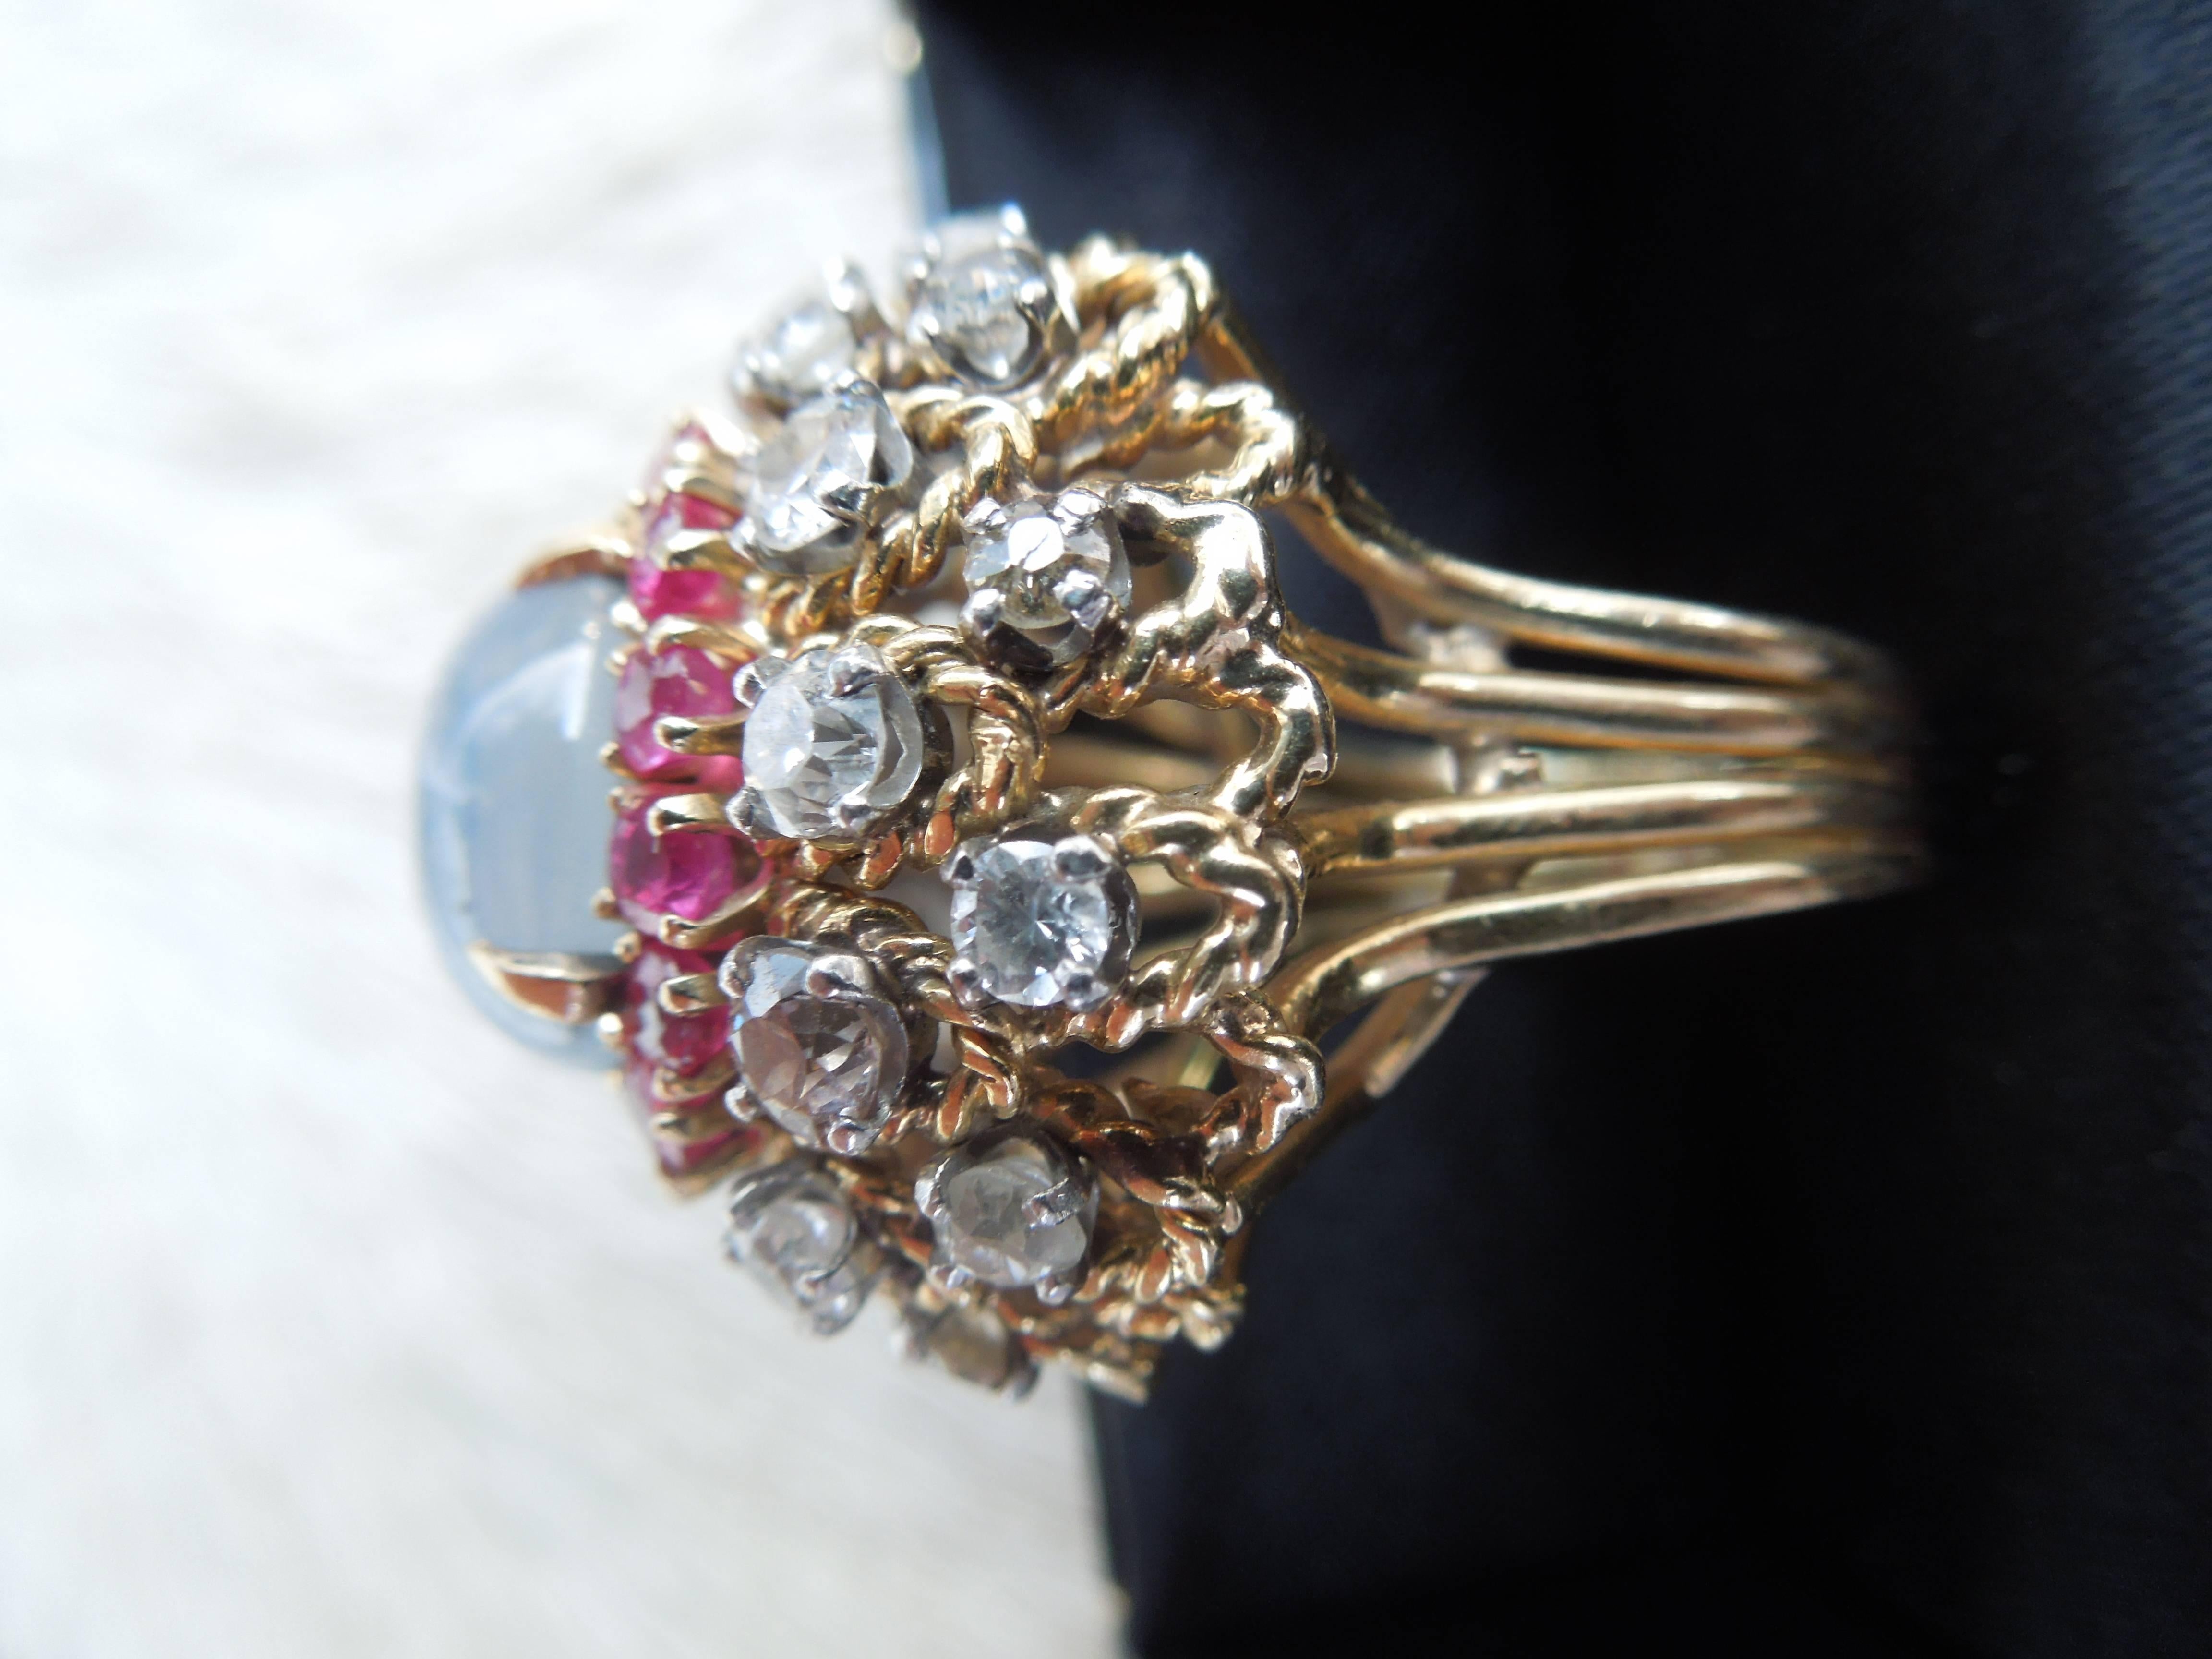 Gold 1960s Palm Springs Fashion Cocktail Ring with Diamonds, Rubies and Star Saphire